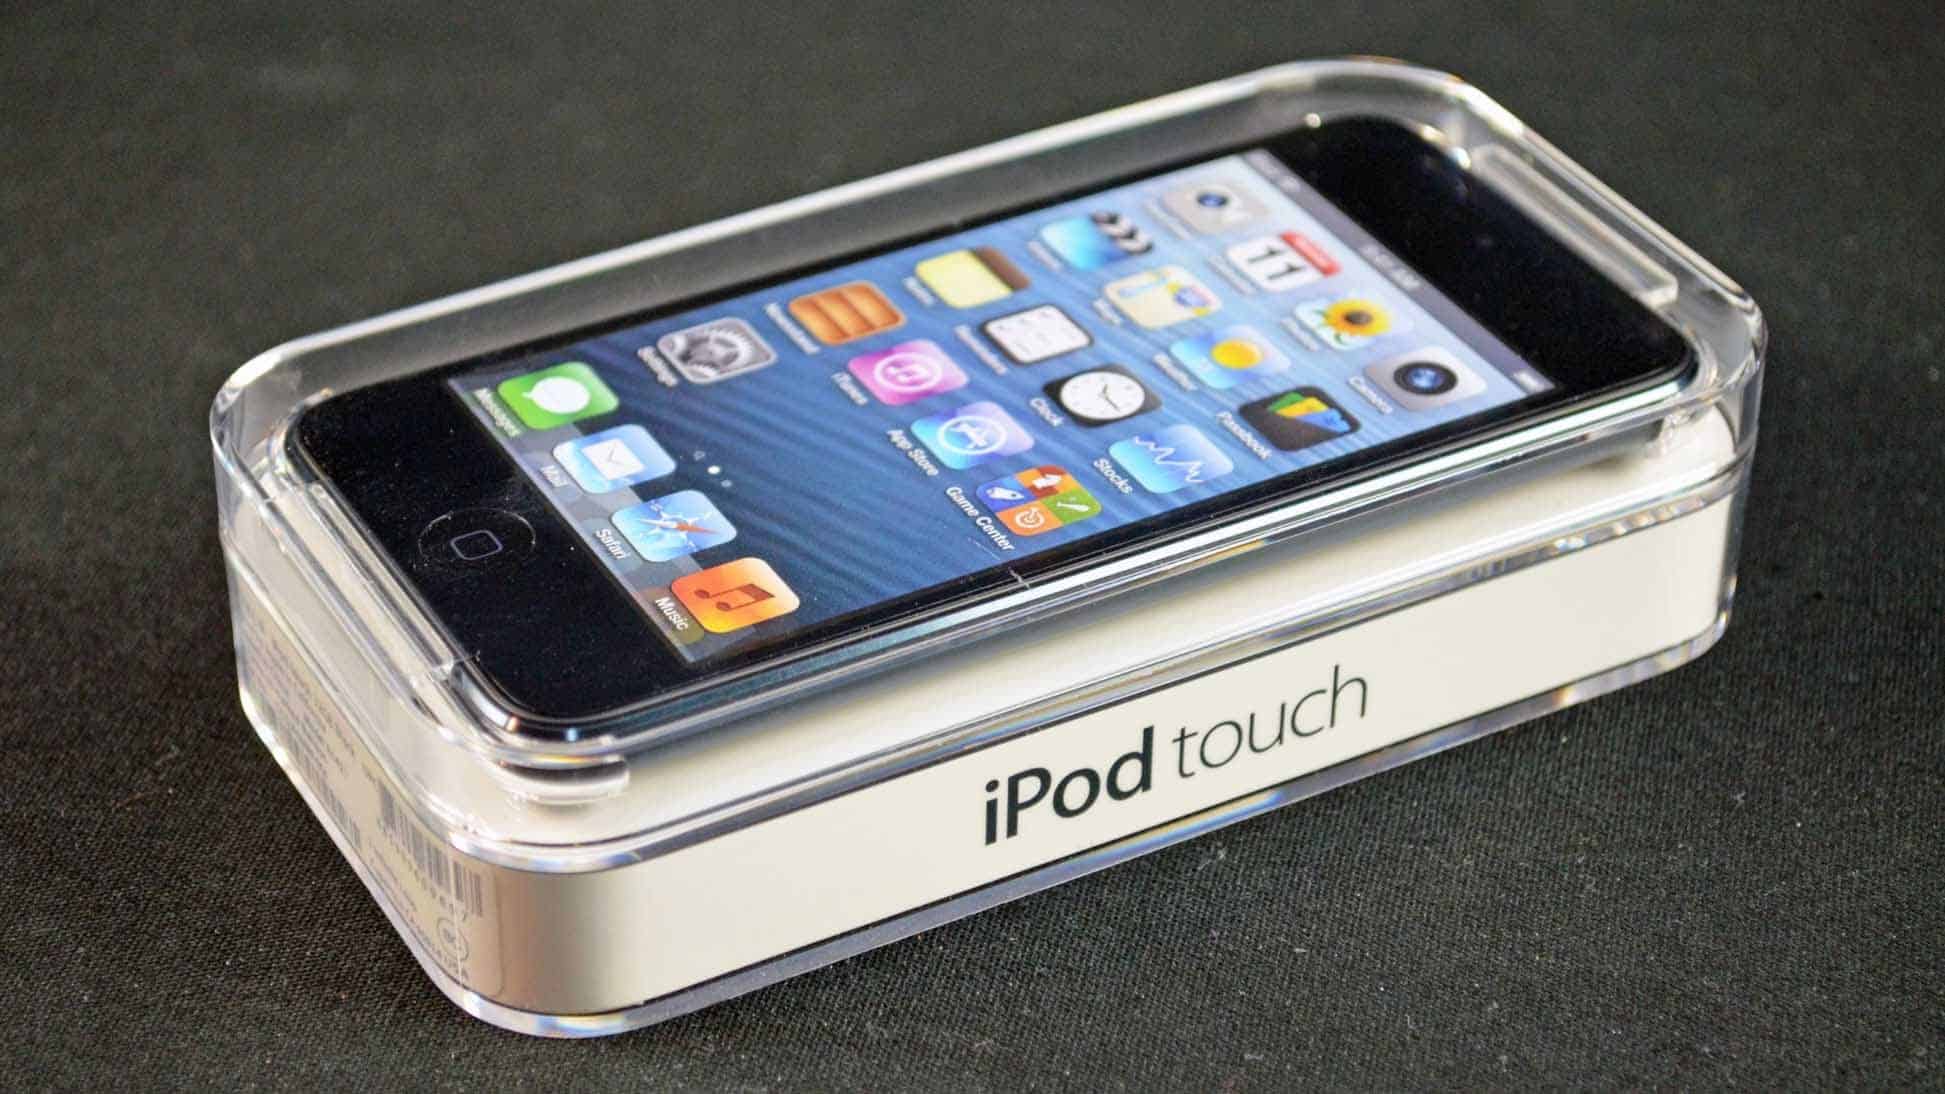 iPod Touch - mp3 player